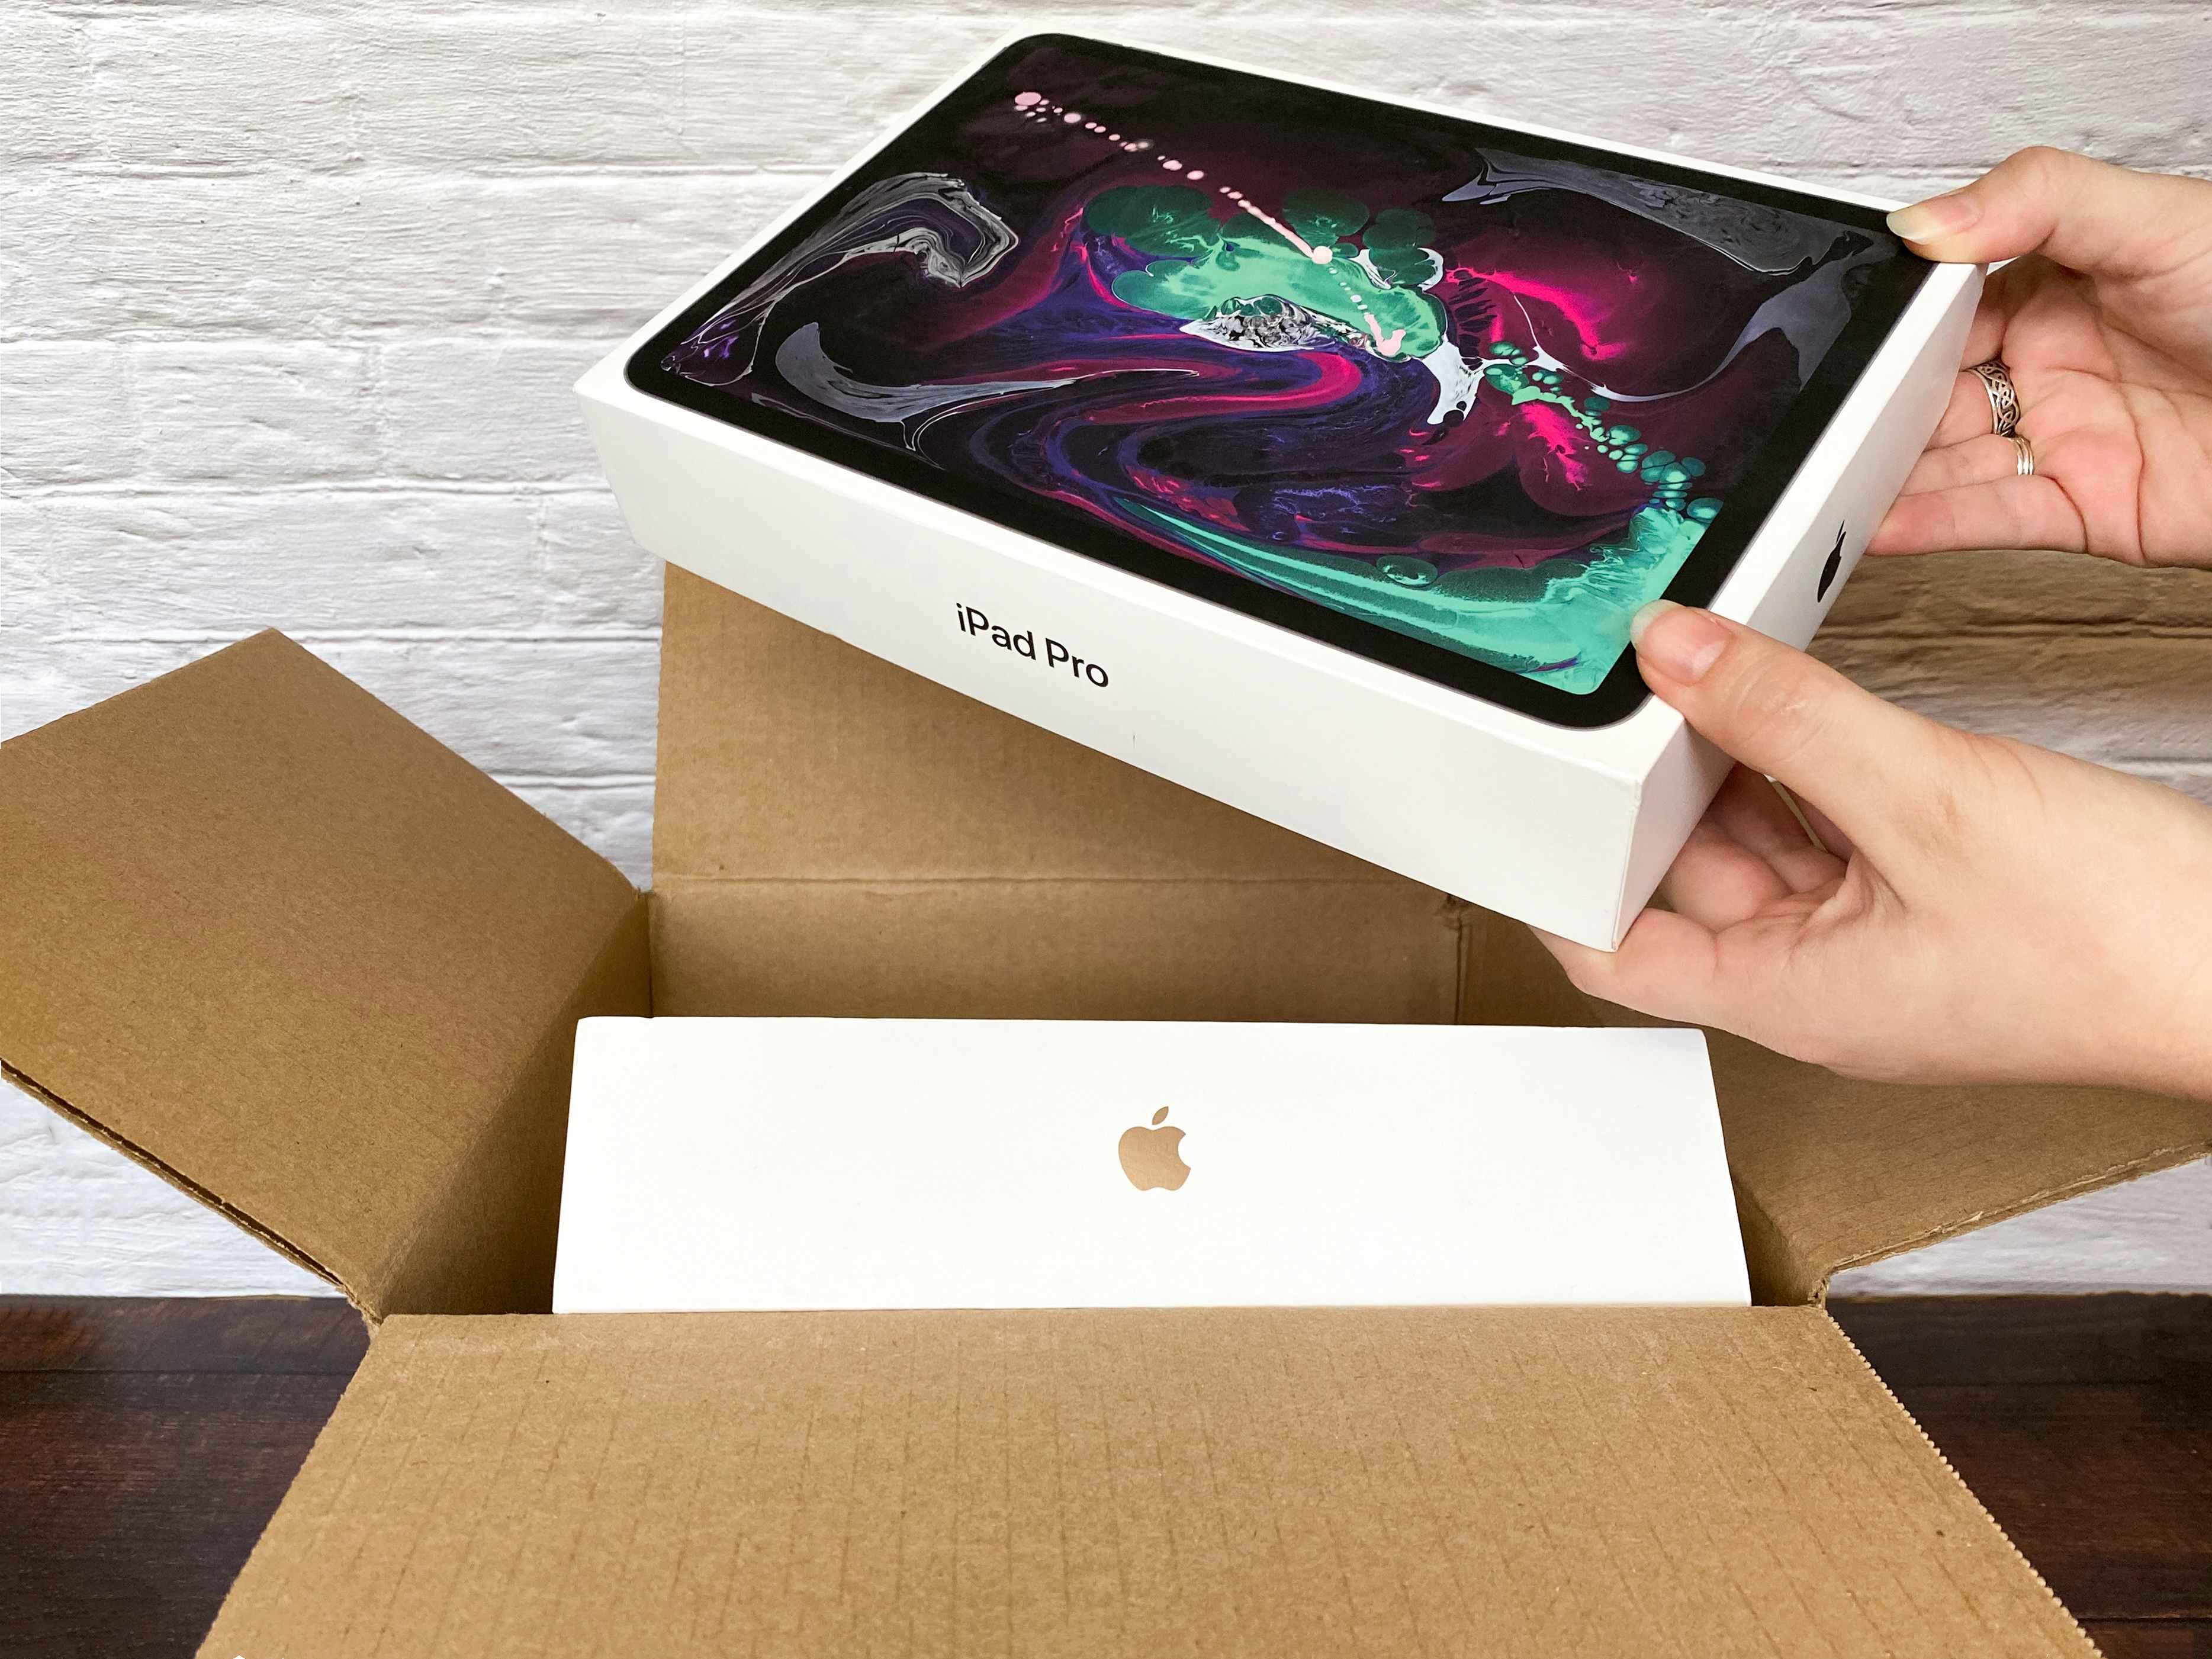 A person taking an iPad pro out of a shipping box with another Apple product inside.